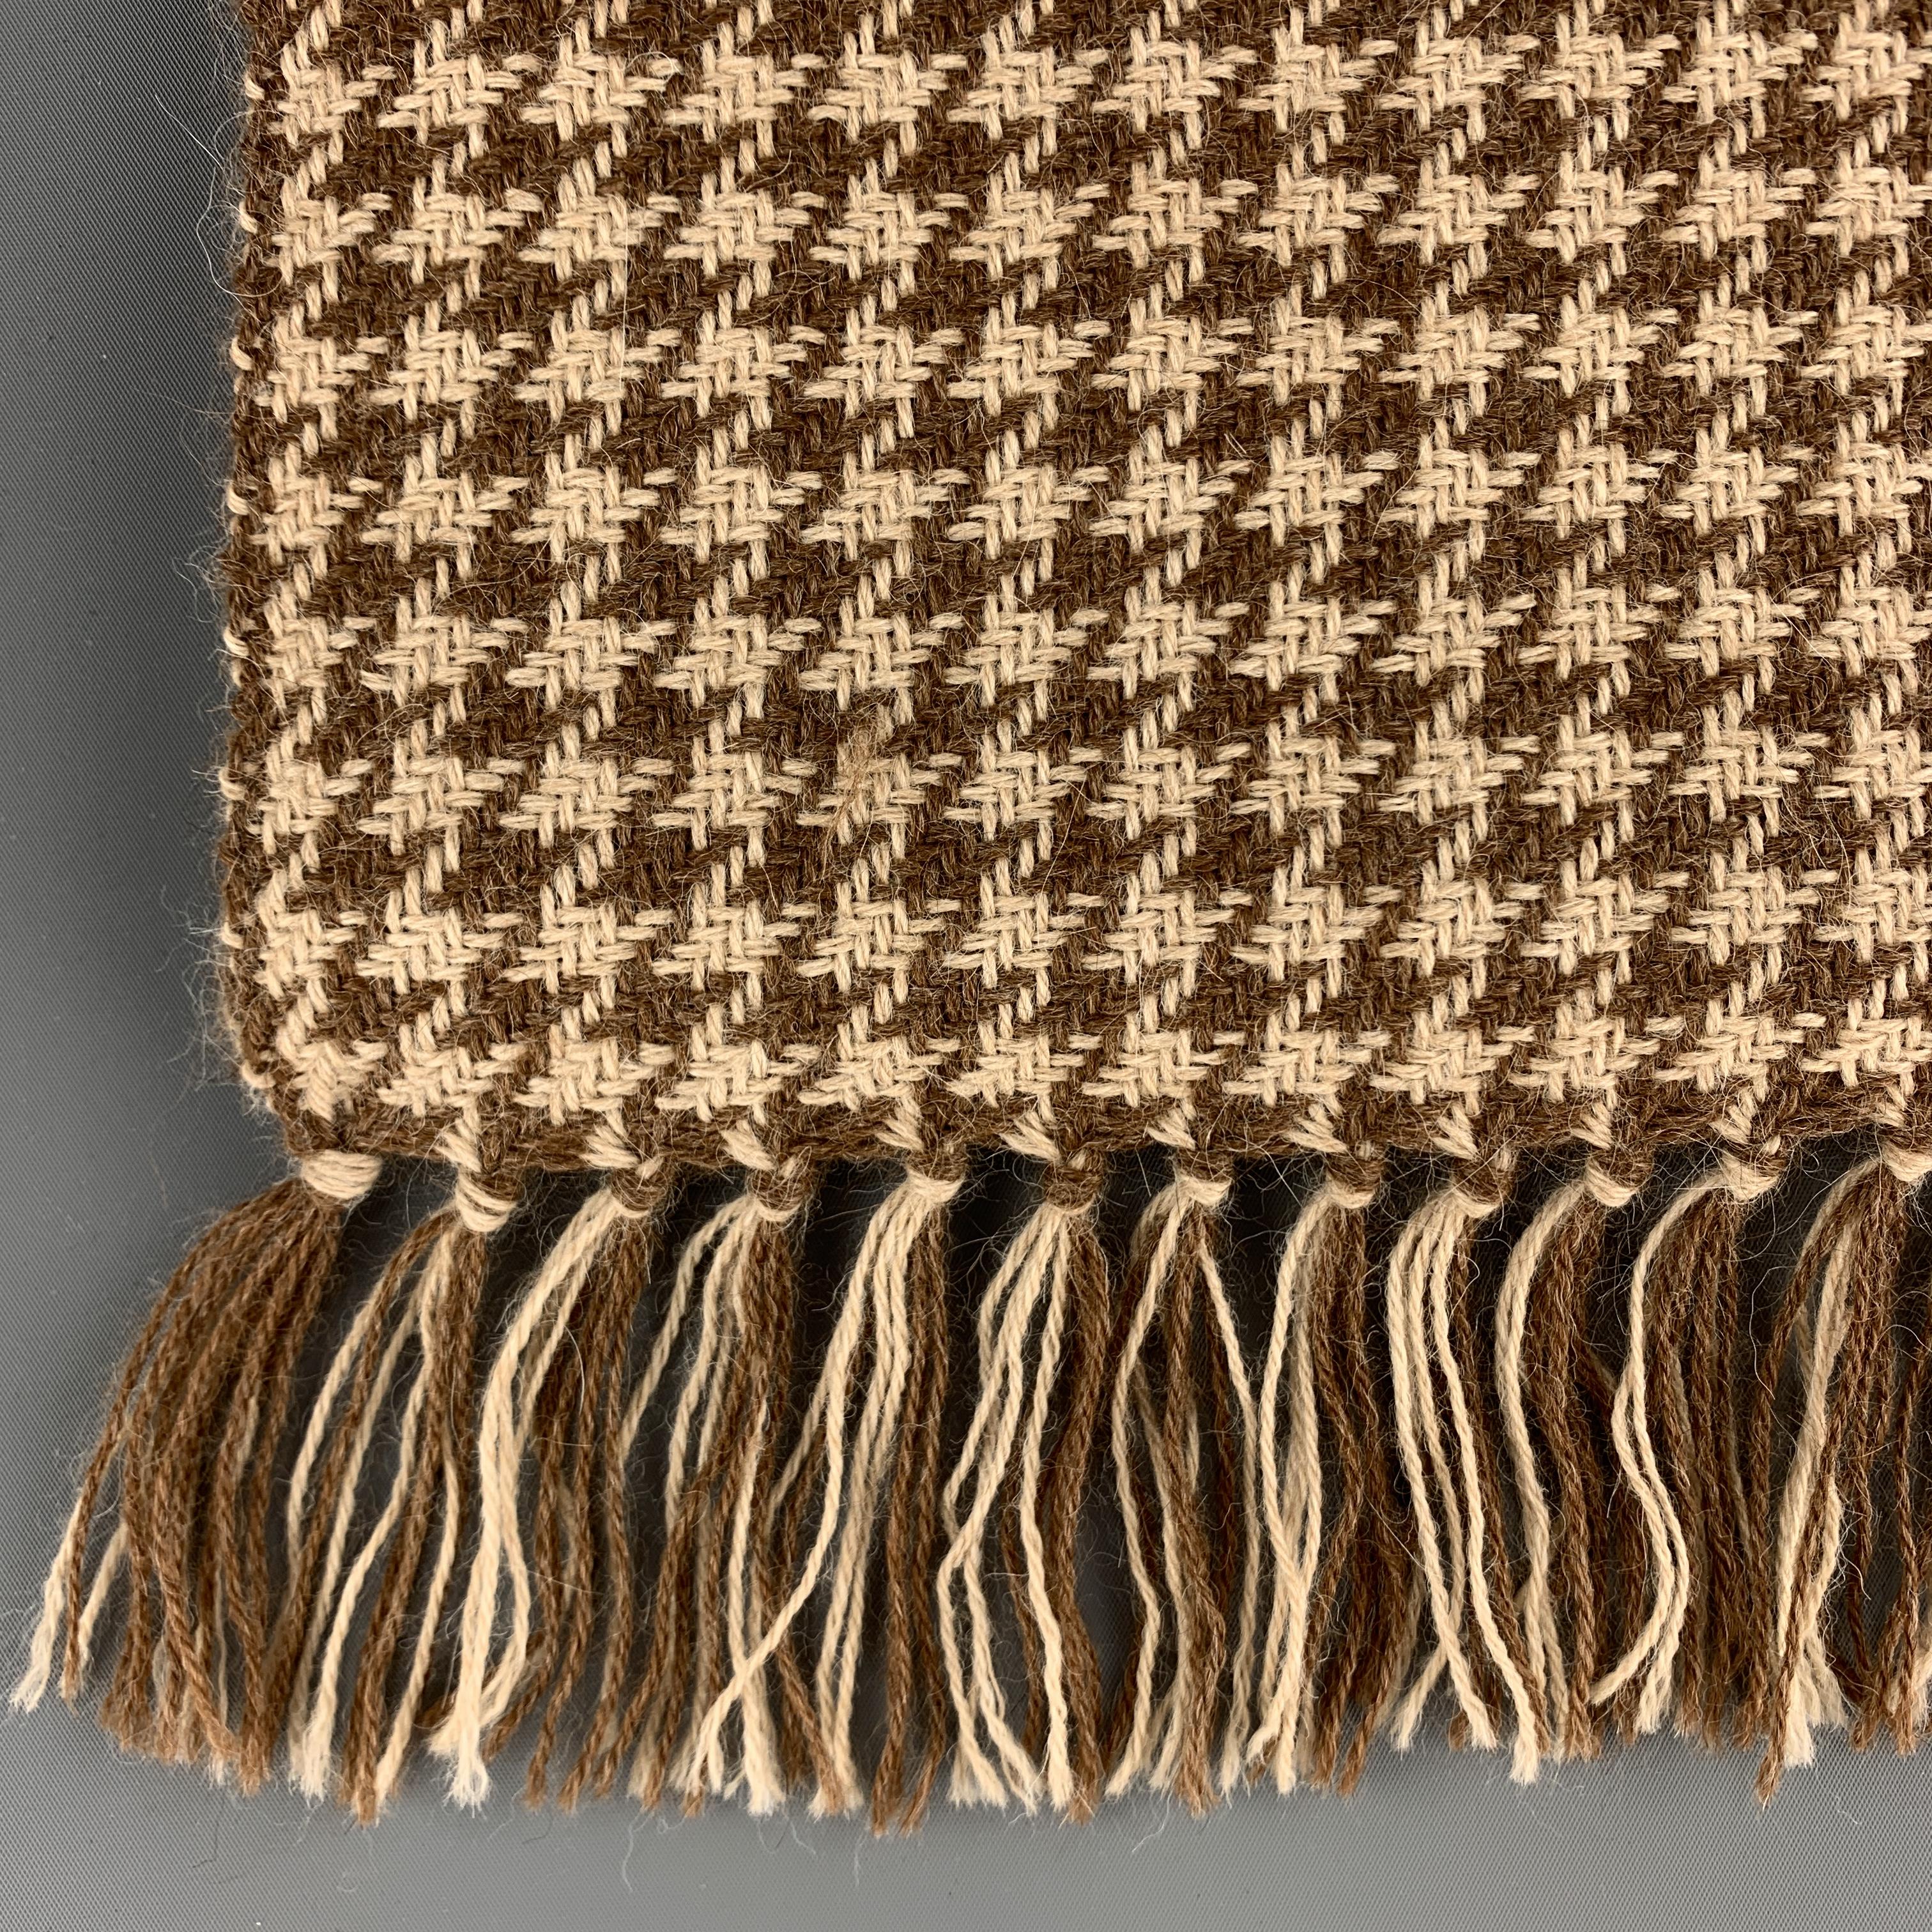 HAYWARD LONDON scarf comes in beige and brown houndstooth pattern woven alpaca with three and a half inch fringe. Made in Ireland.

Excellent Pre-Owned Condition.

57 x 12 in.